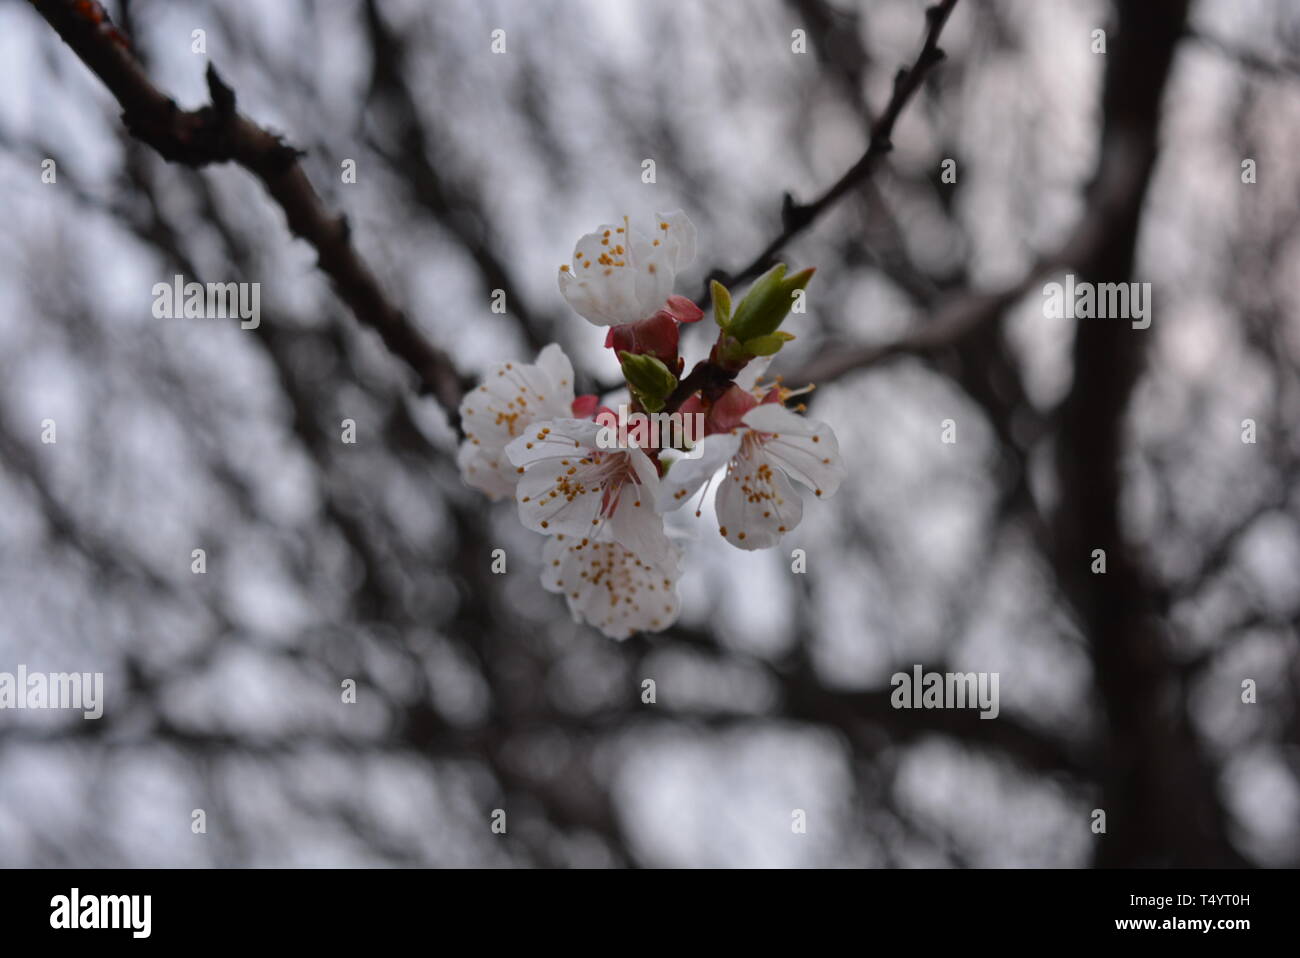 Spring young tree with beautiful inflorescences, apricot flowering period. Beautiful whiter apricot flowers. Stock Photo